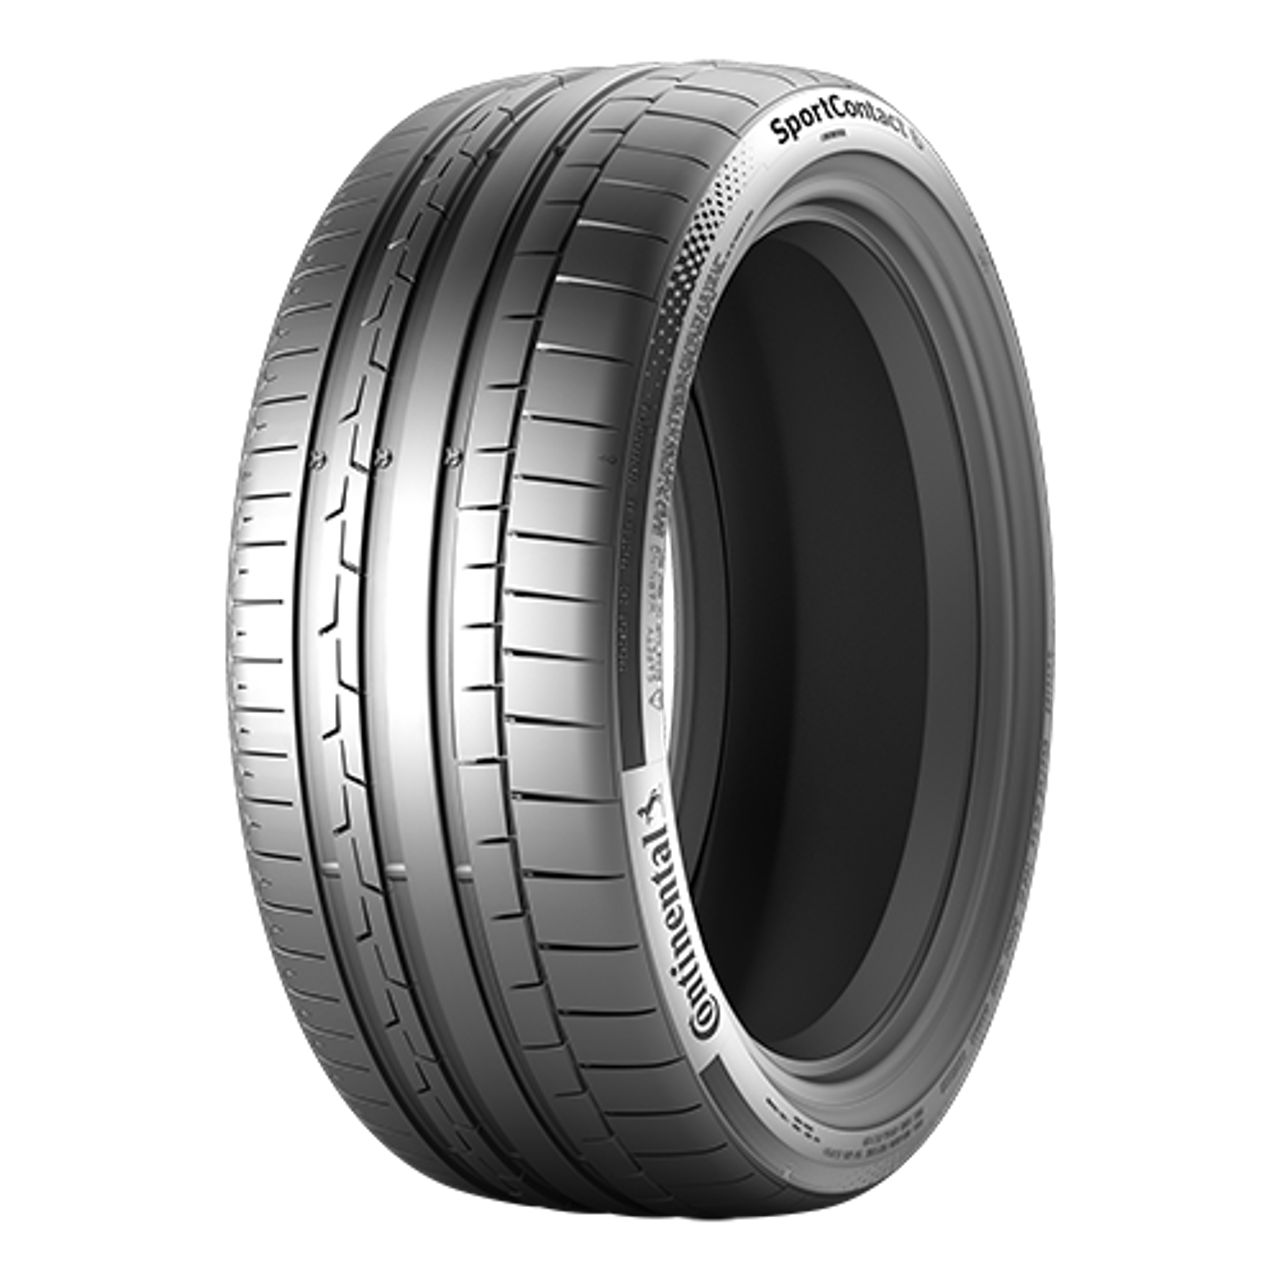 CONTINENTAL SPORTCONTACT 6 (*) (EVc) 235/35R19 91Y FR BSW